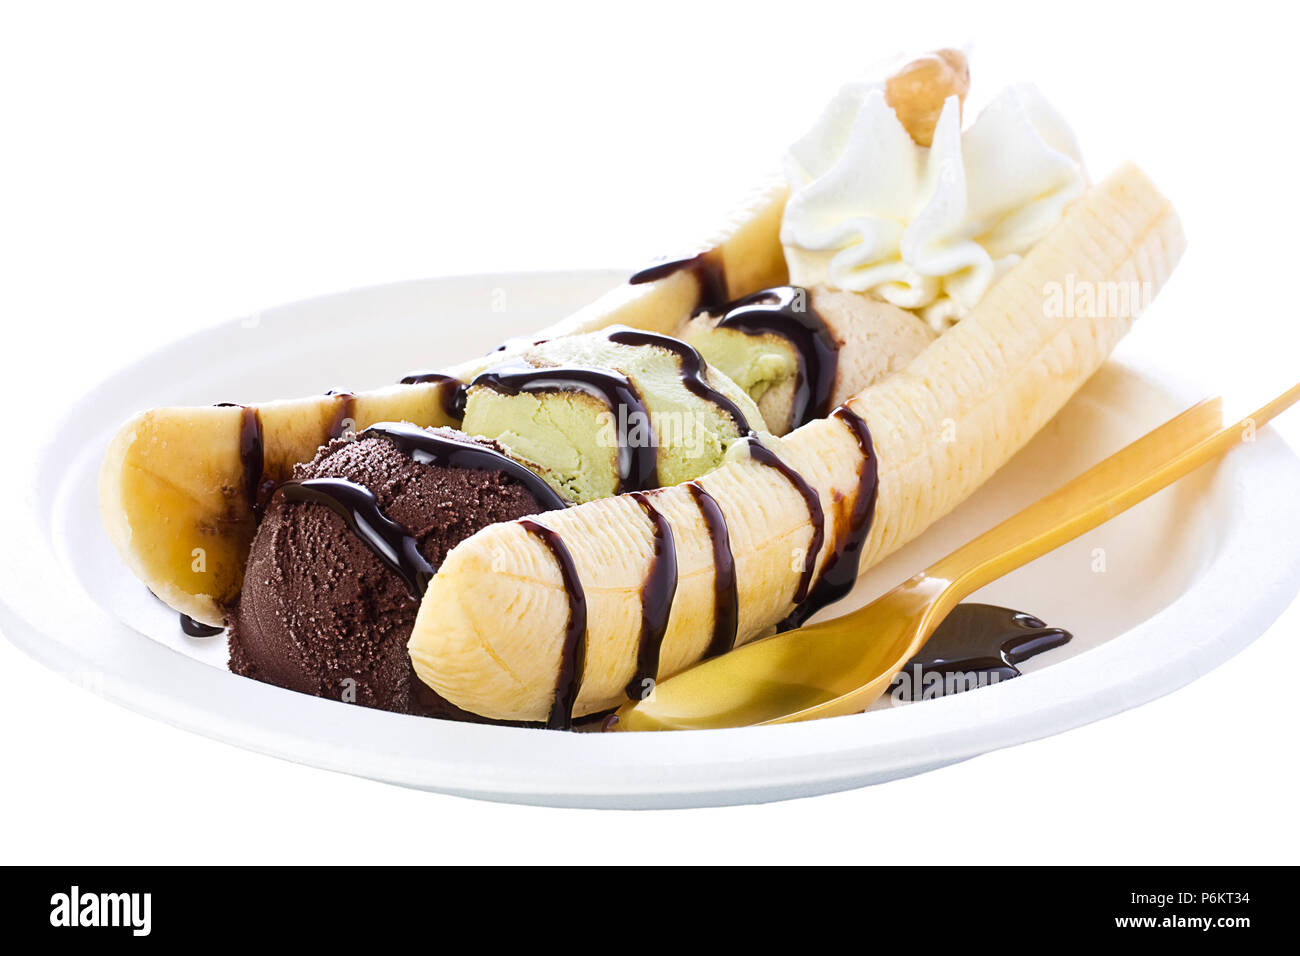 Banana split with pistachio hazelnut and chocolate ice cream garnished with chocolate syrup and whipped cream Stock Photo